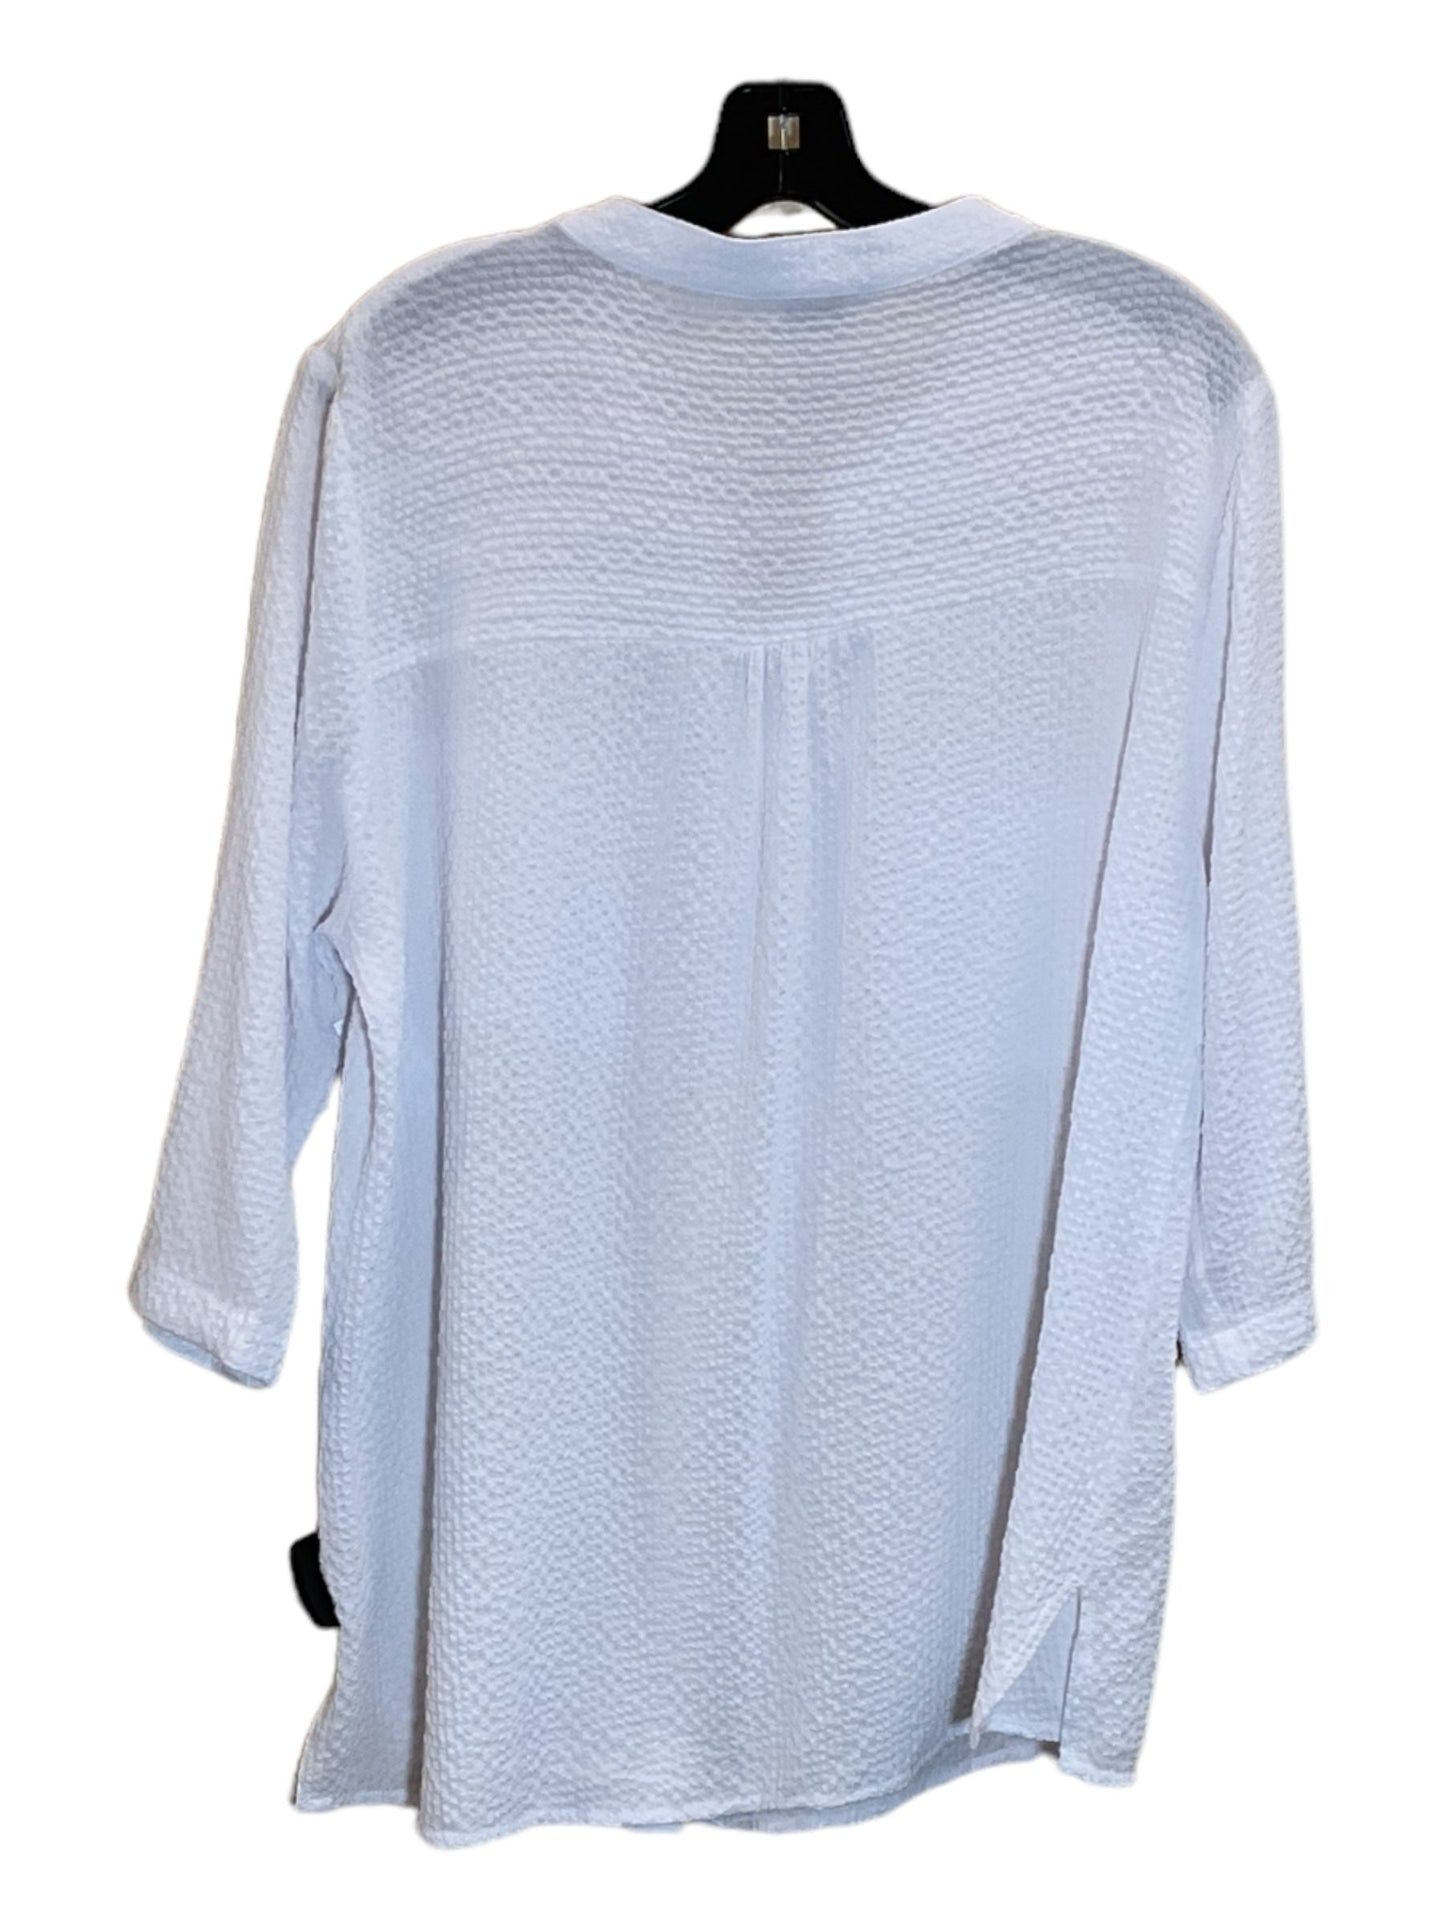 White Top 3/4 Sleeve Multiples, Size L